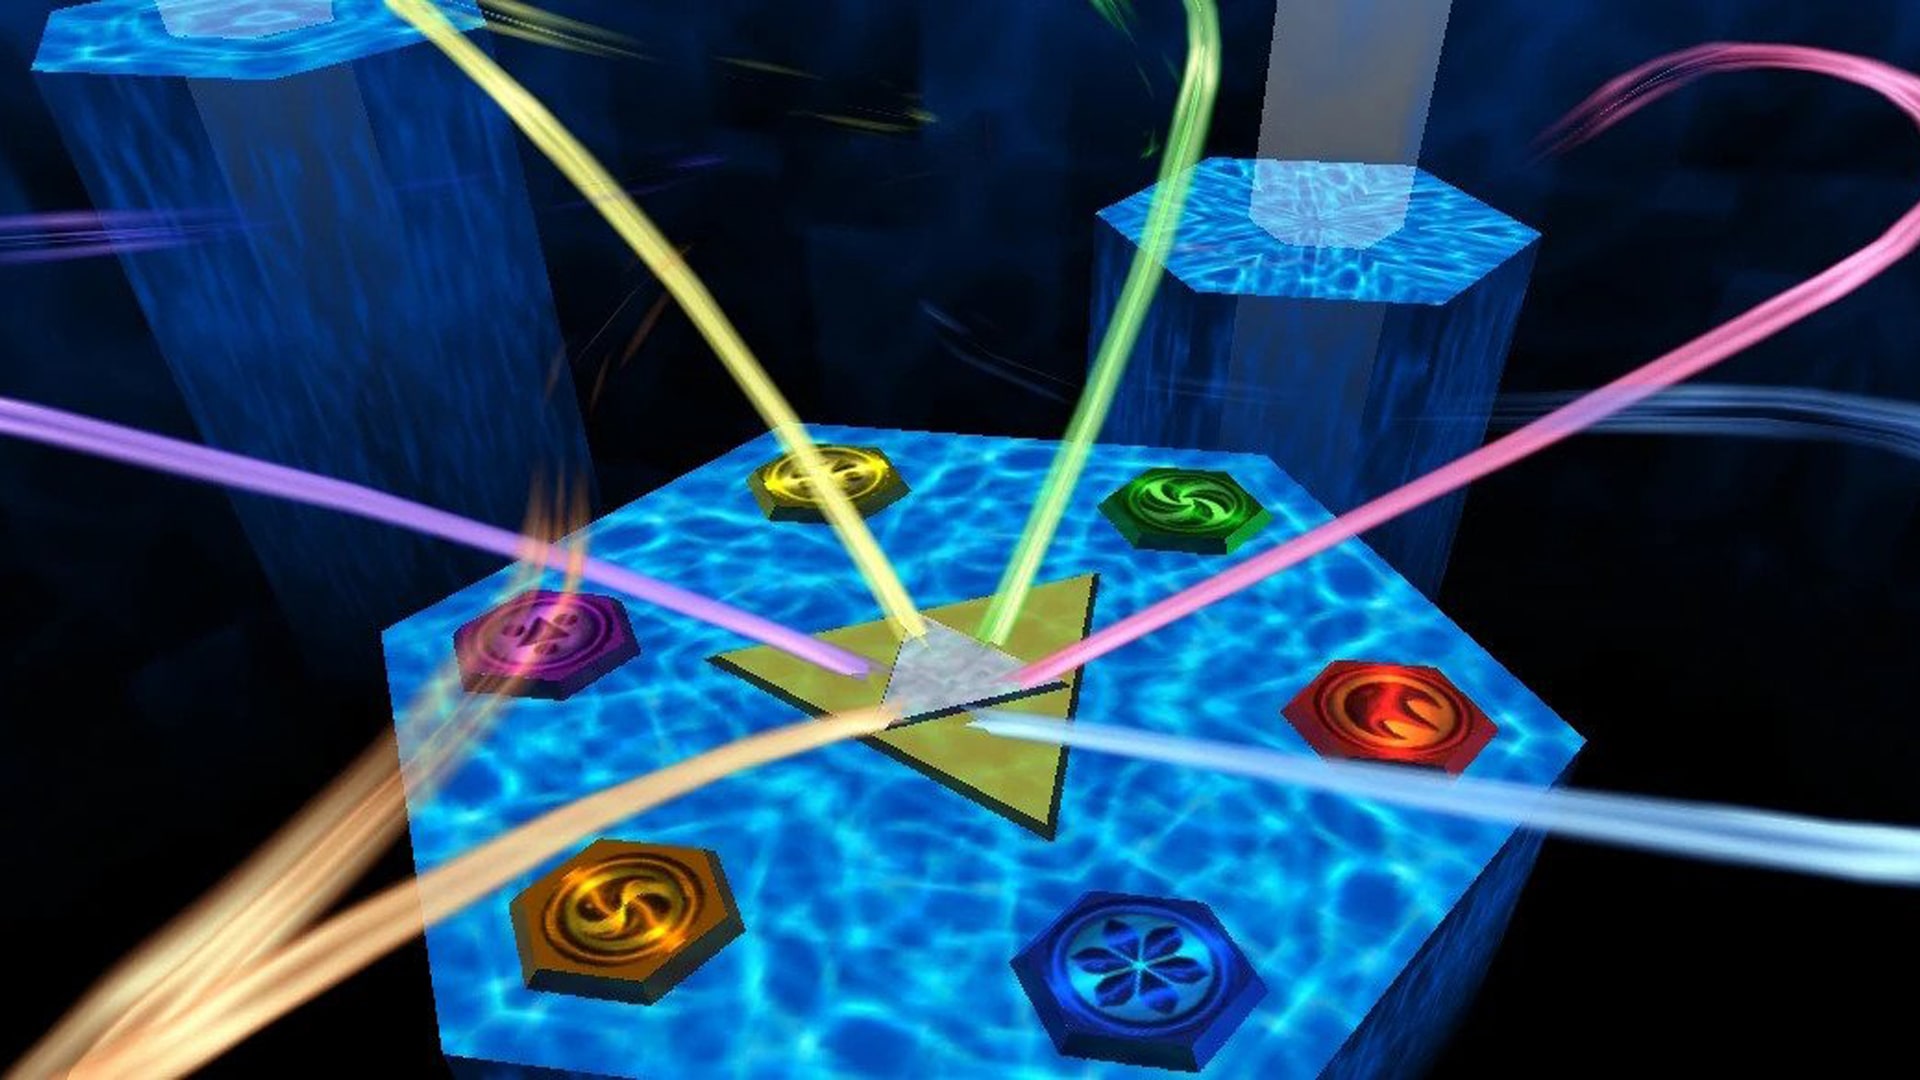 Depiction of the Sacred Realm in The Legend of Zelda: Ocarina of Time